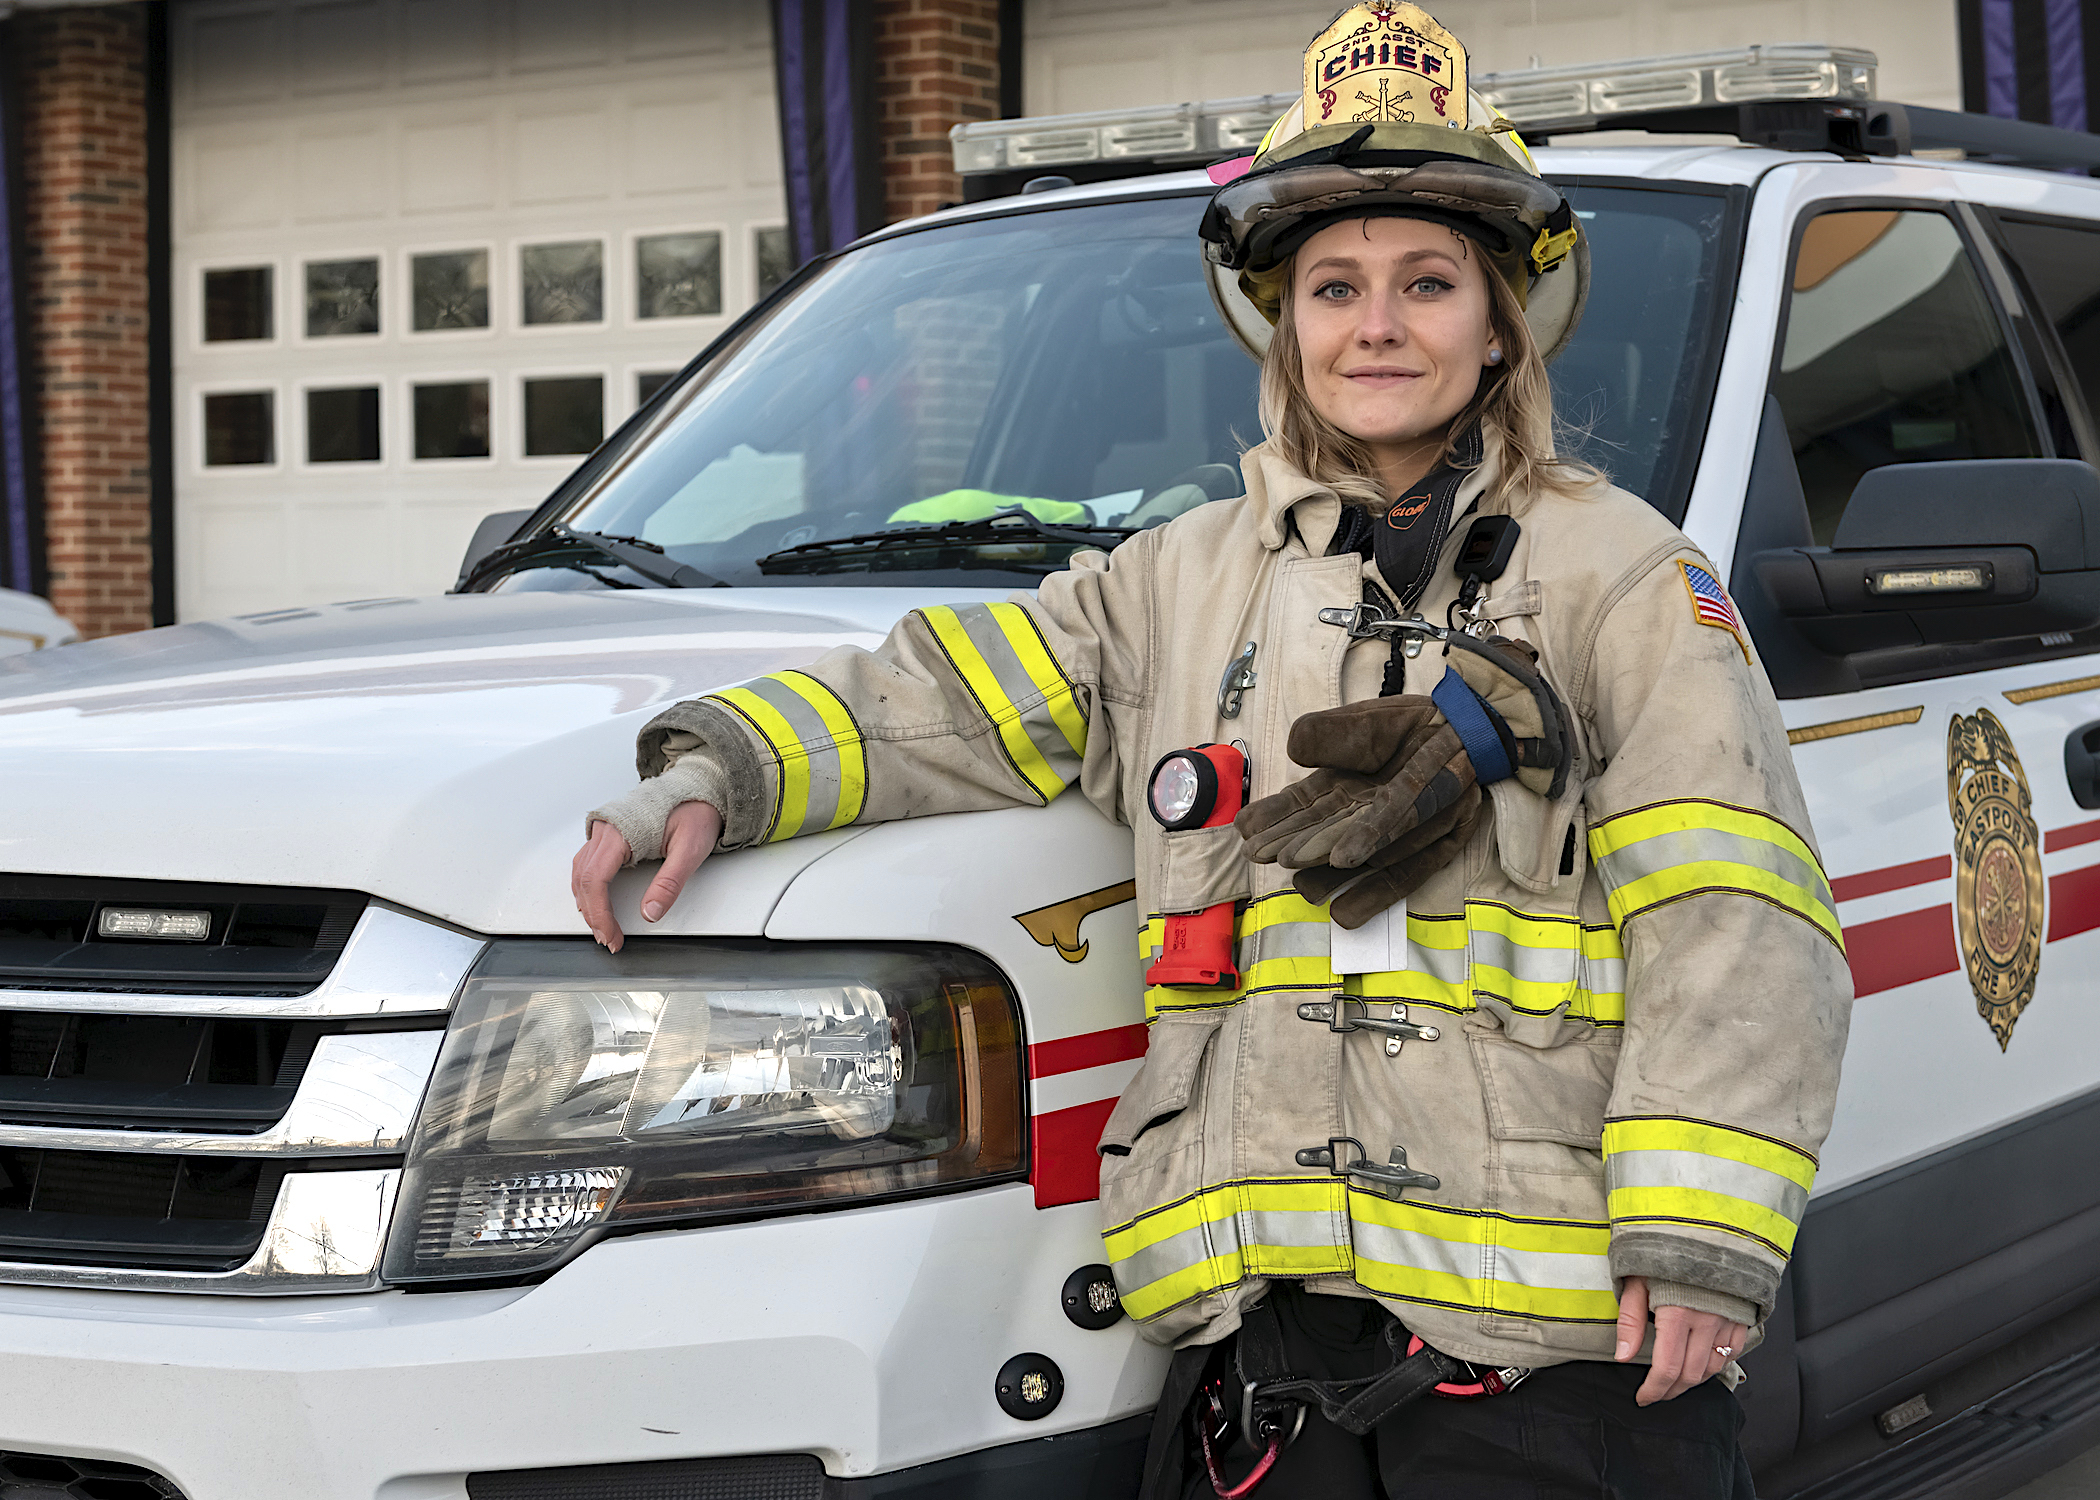 Virginia Massey was elected second assistant chief by Eastport Fire Department members in December of last year. WESTHAMPTON BEACH FIRE DEPARTMENT